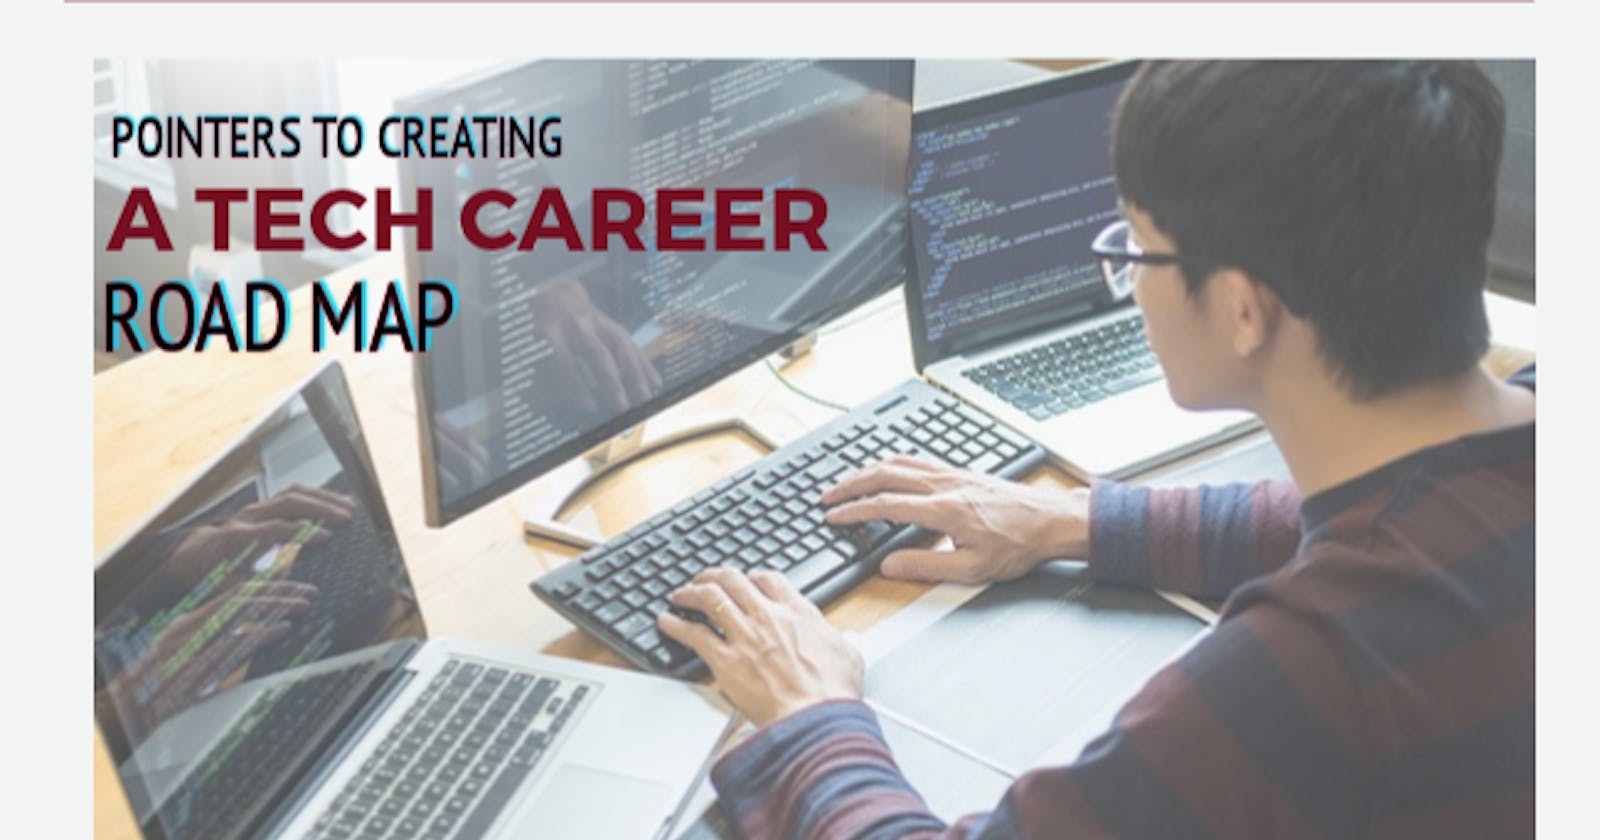 Pointers To Creating A Tech Career Road Map.